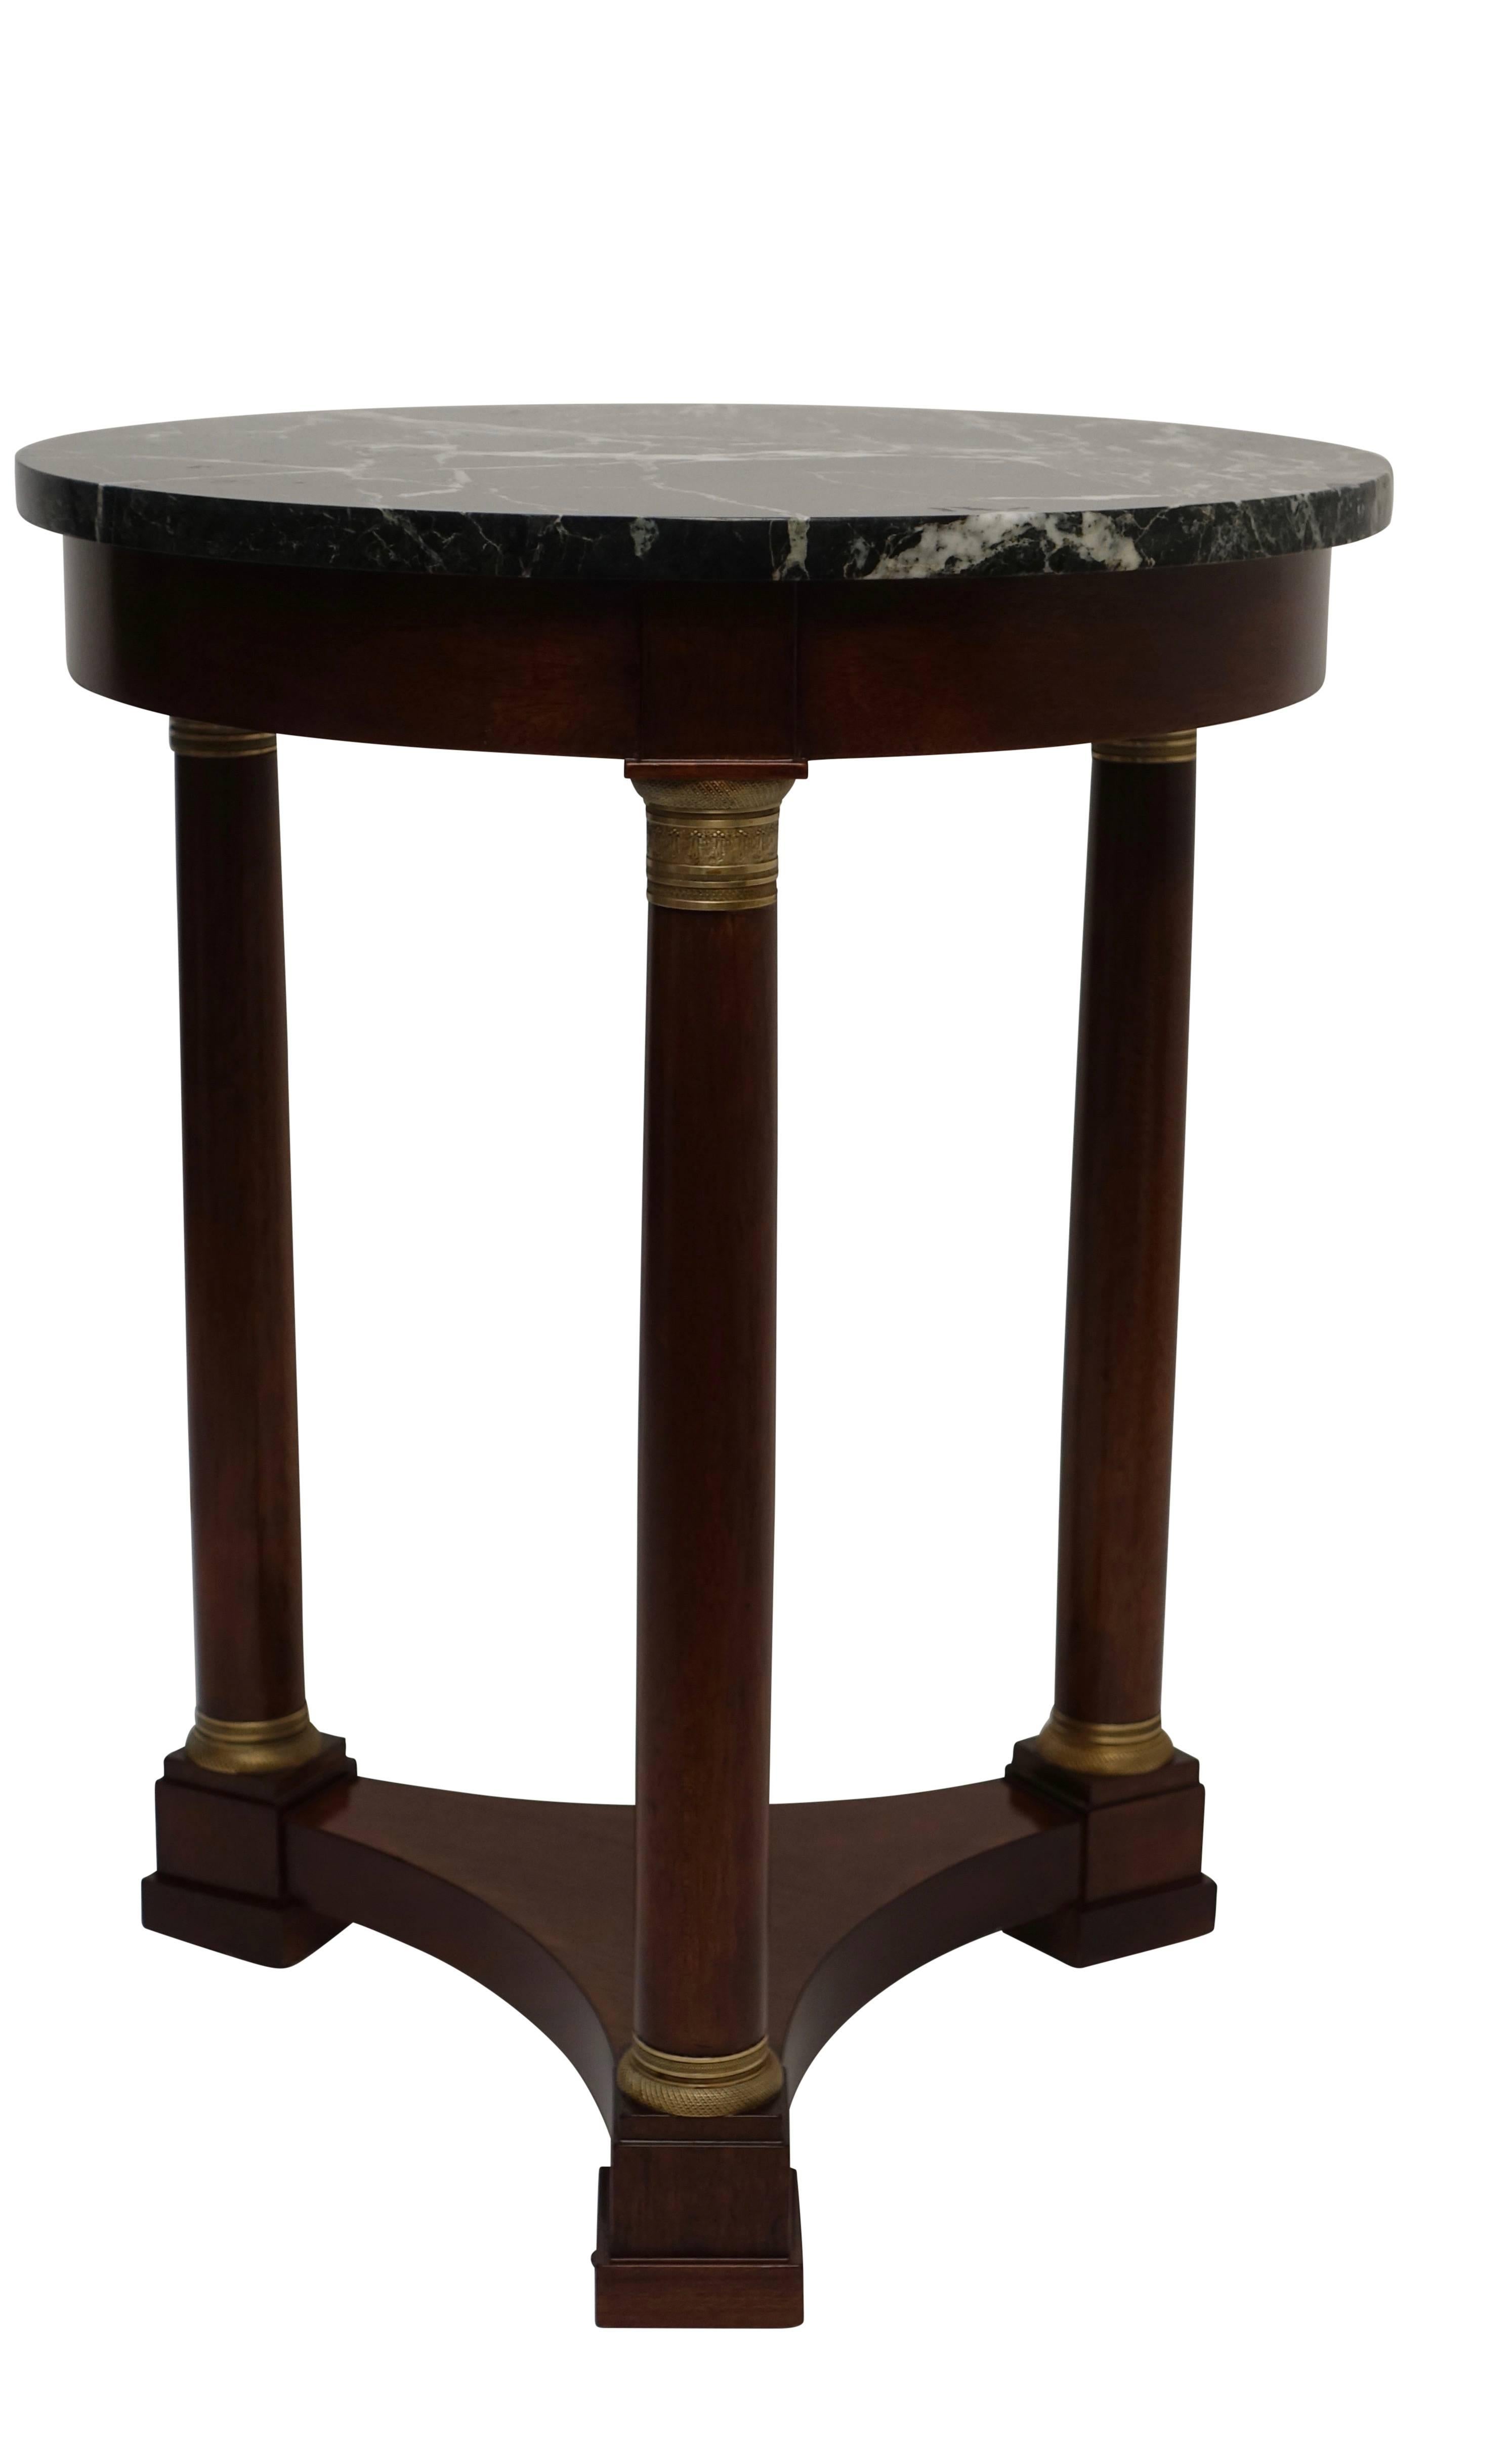 An Empire style mahogany side table with dark green marble top and brass-mounted columns.